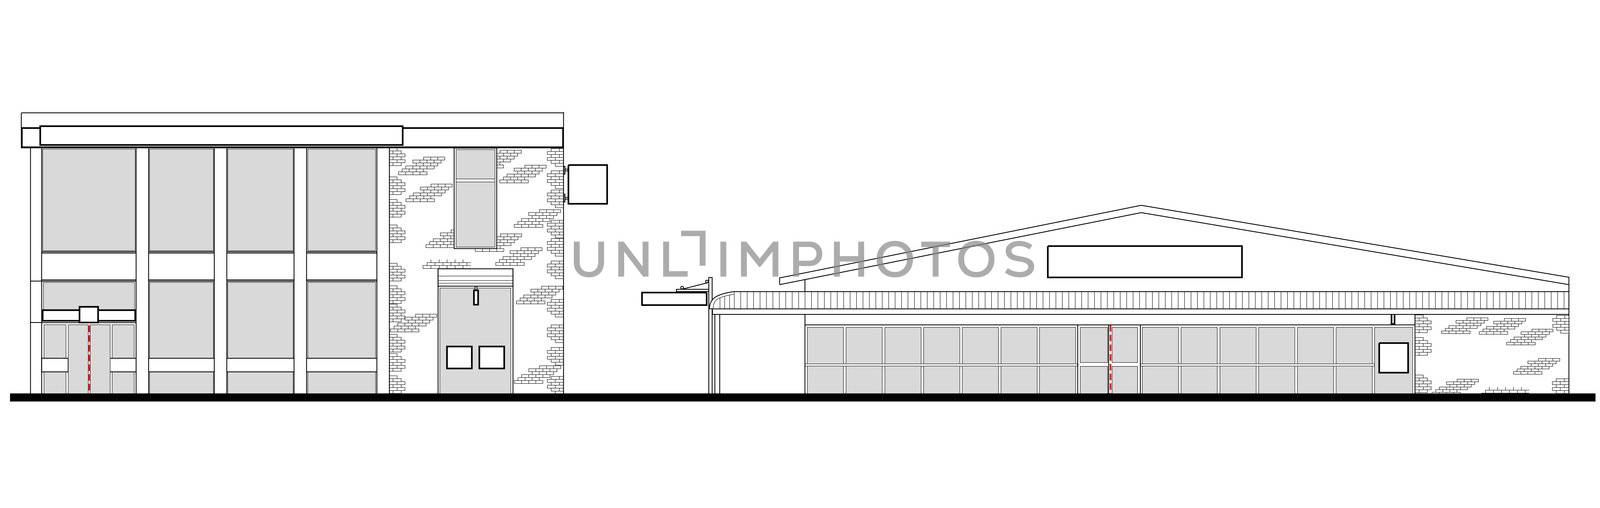 line drawing illustration of a strip mall or shopping center building viewed from front elevation on white background